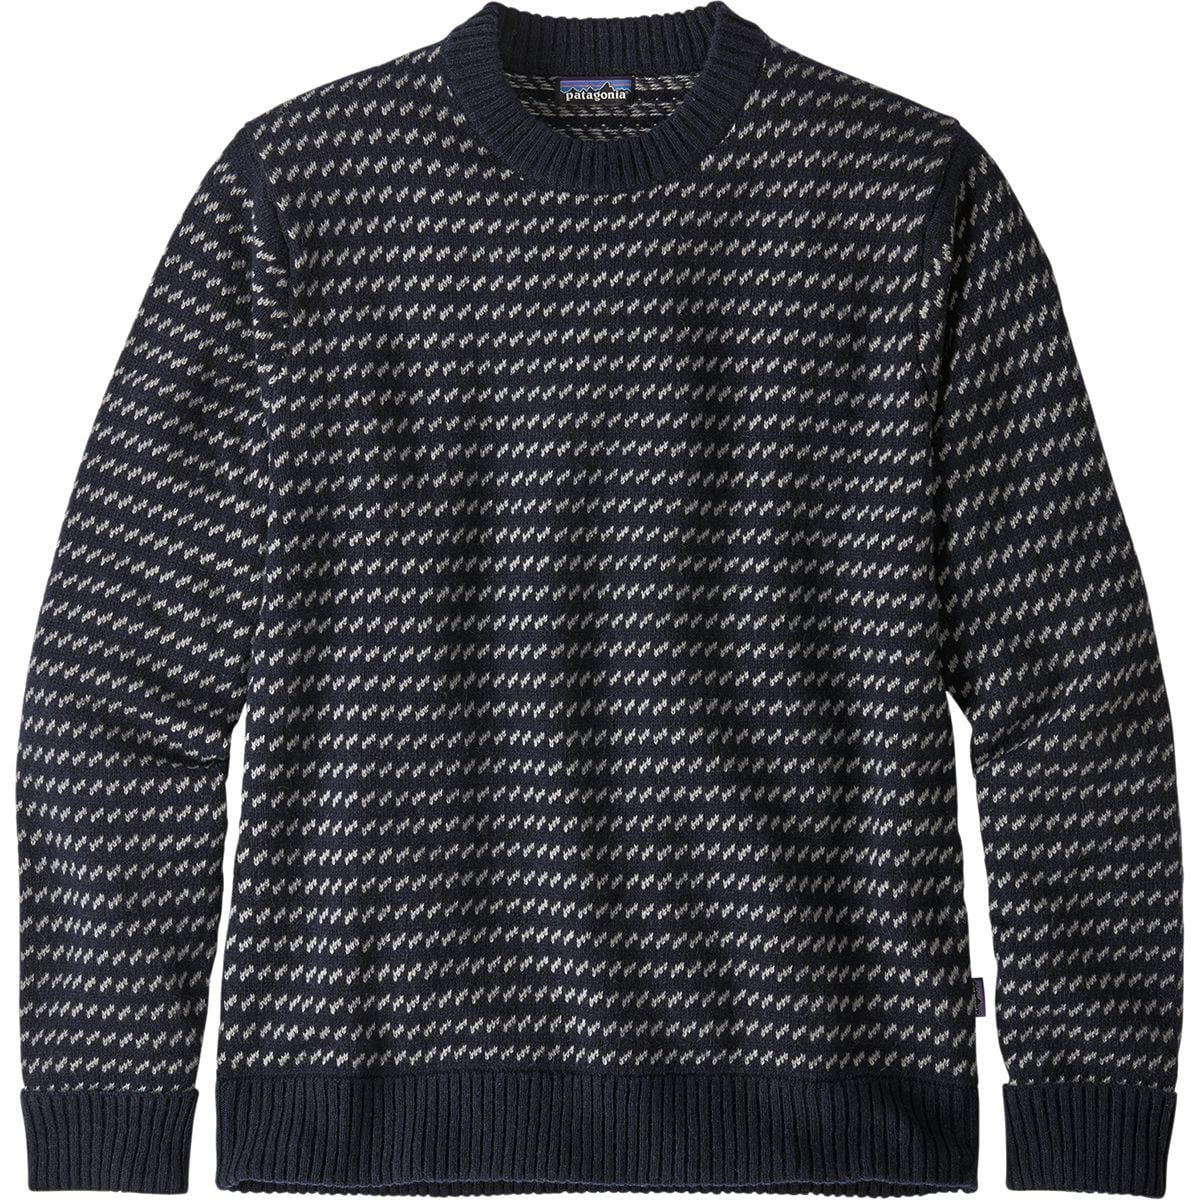 Patagonia Recycled Wool Sweater - Men's - Clothing